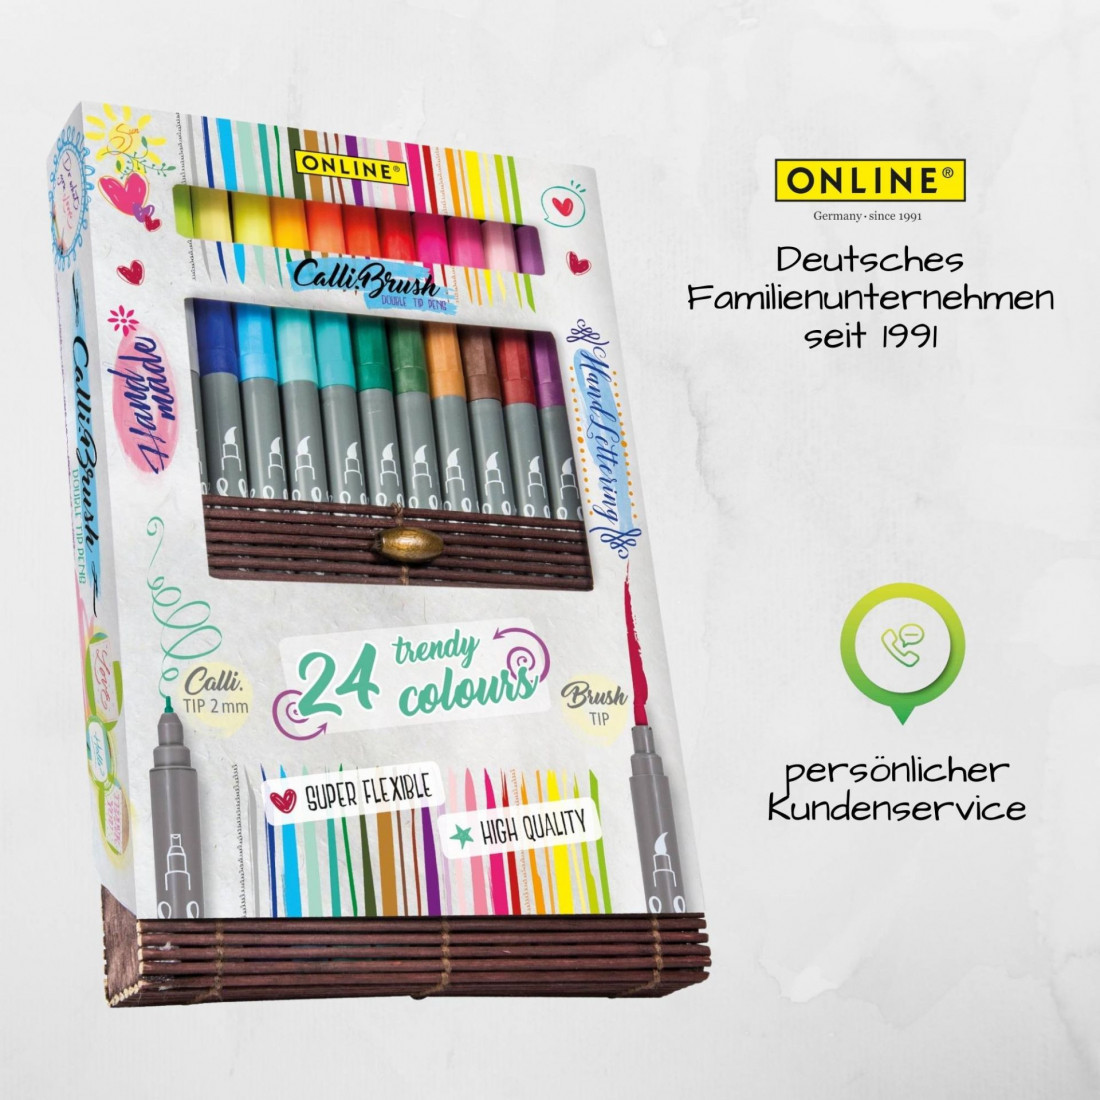 Calli.Brush Double Tip Pens for creative writing with calligraphy nib and brush 19082 Online